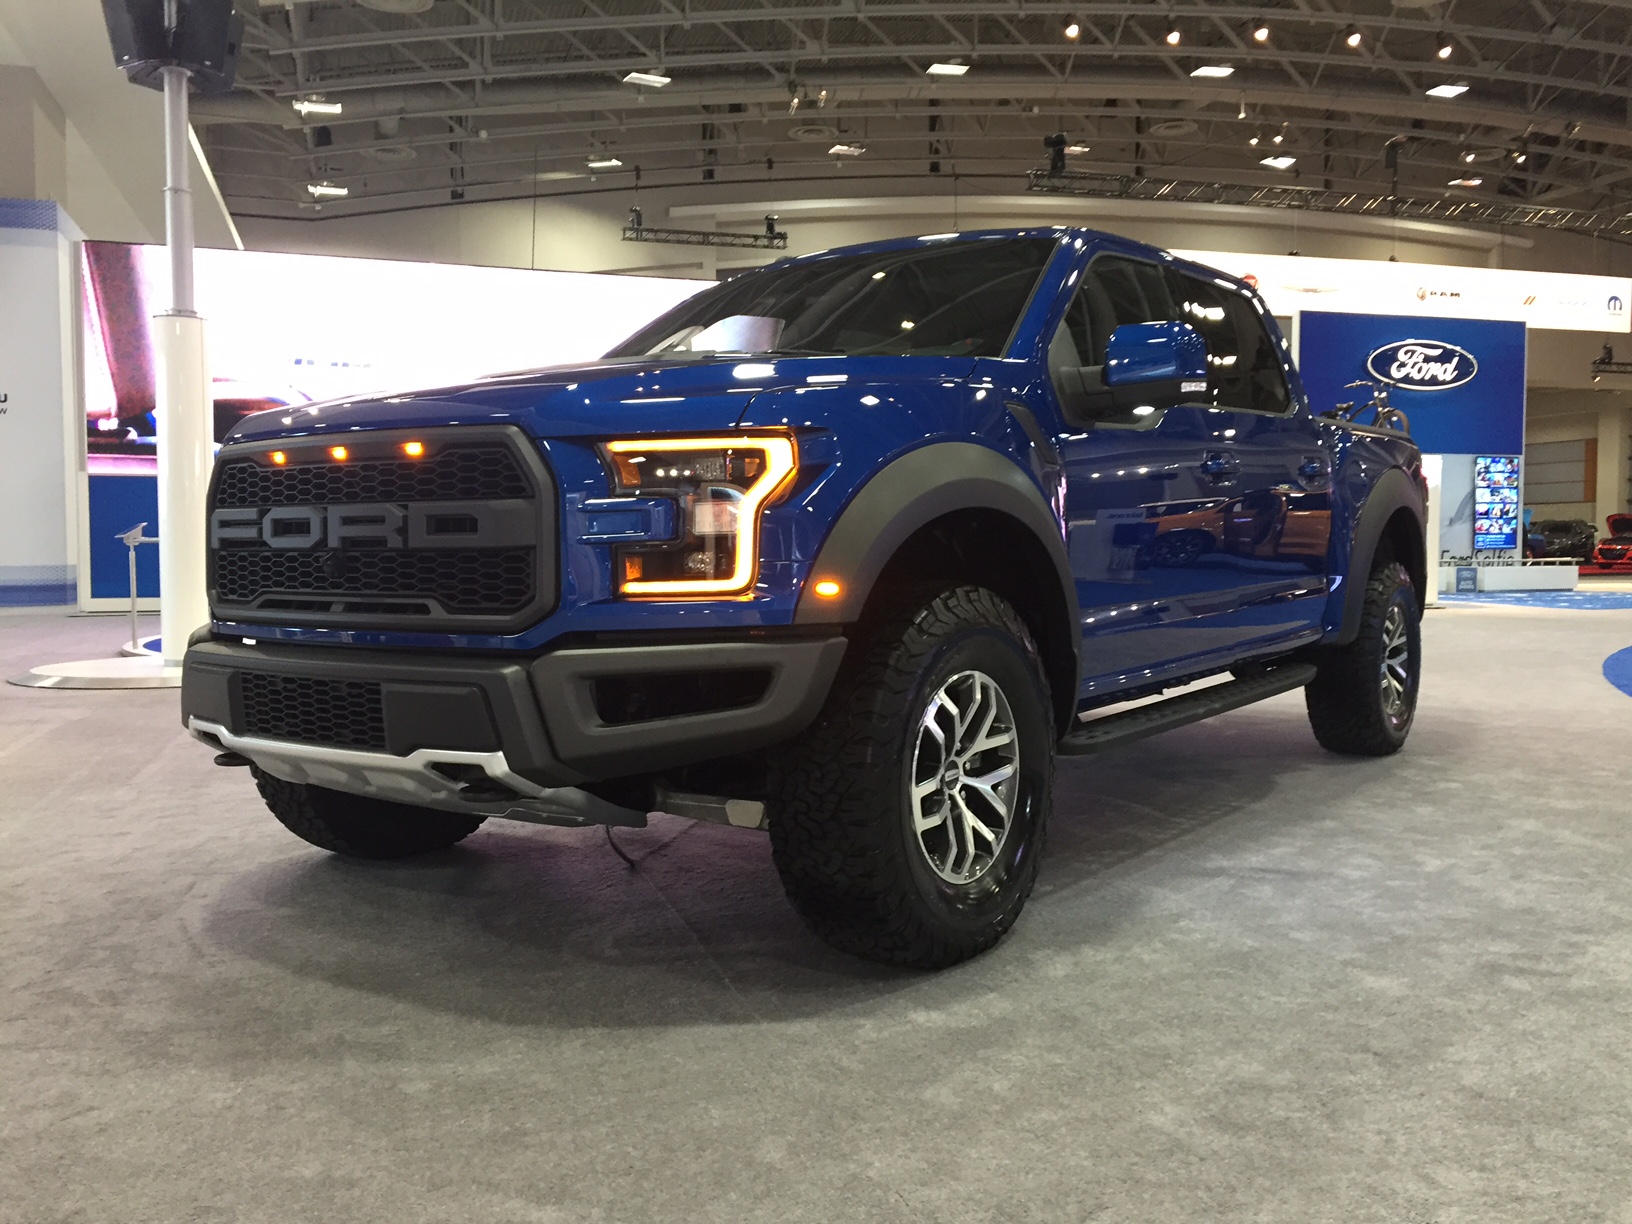 2017 Ford F-150 Raptor: This desert-racer truck is coming back; redesigned as part of the aluminum-bodied F-150 line. (WTOP/John Aaron)